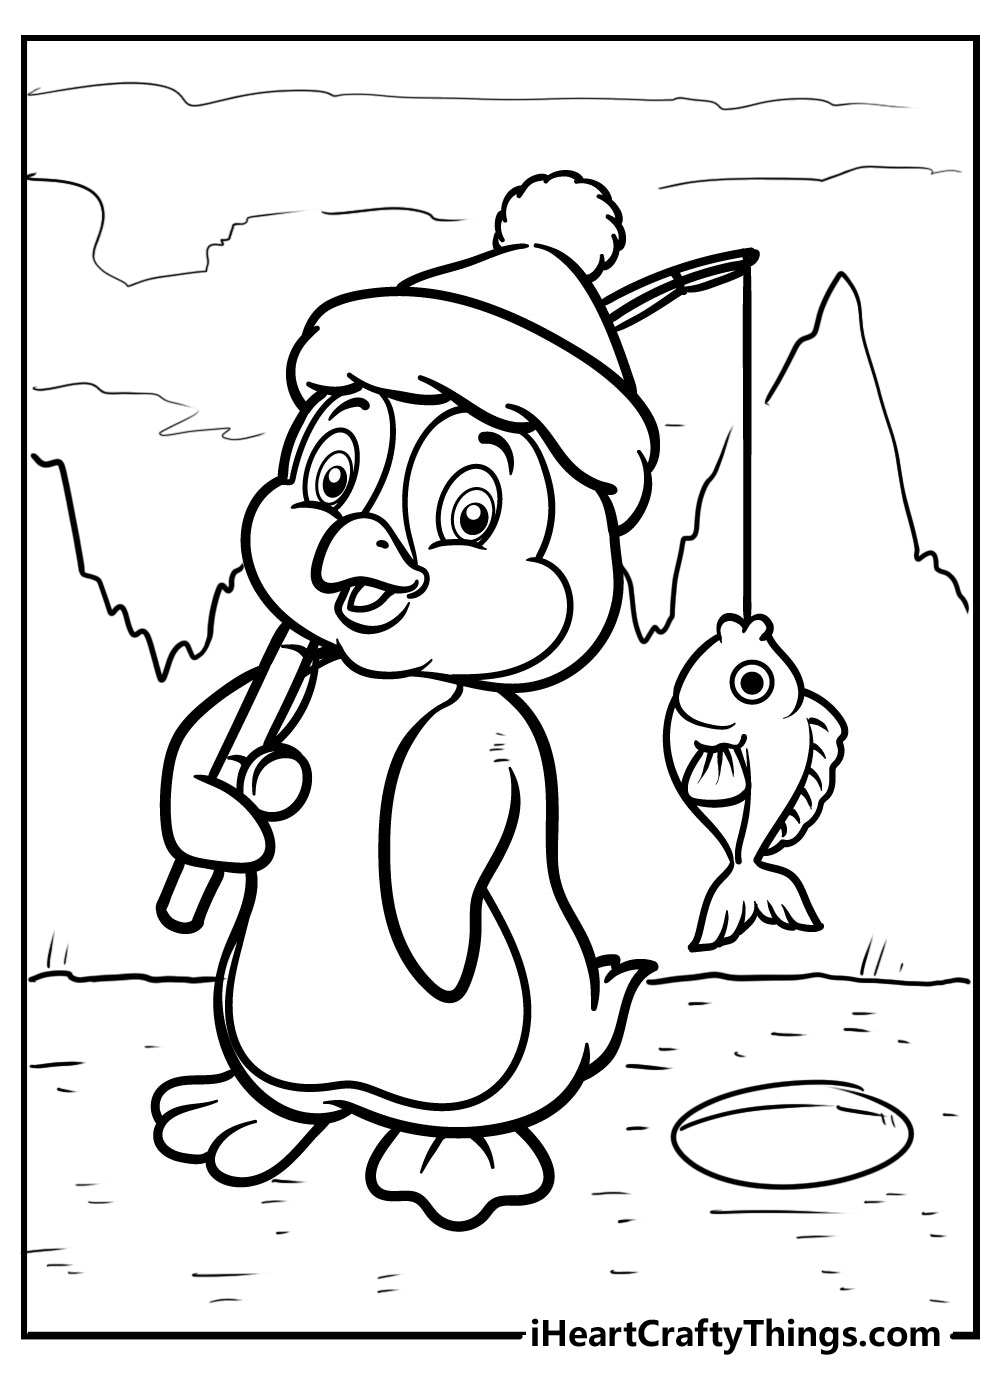 Penguin Coloring Pages Updated 20